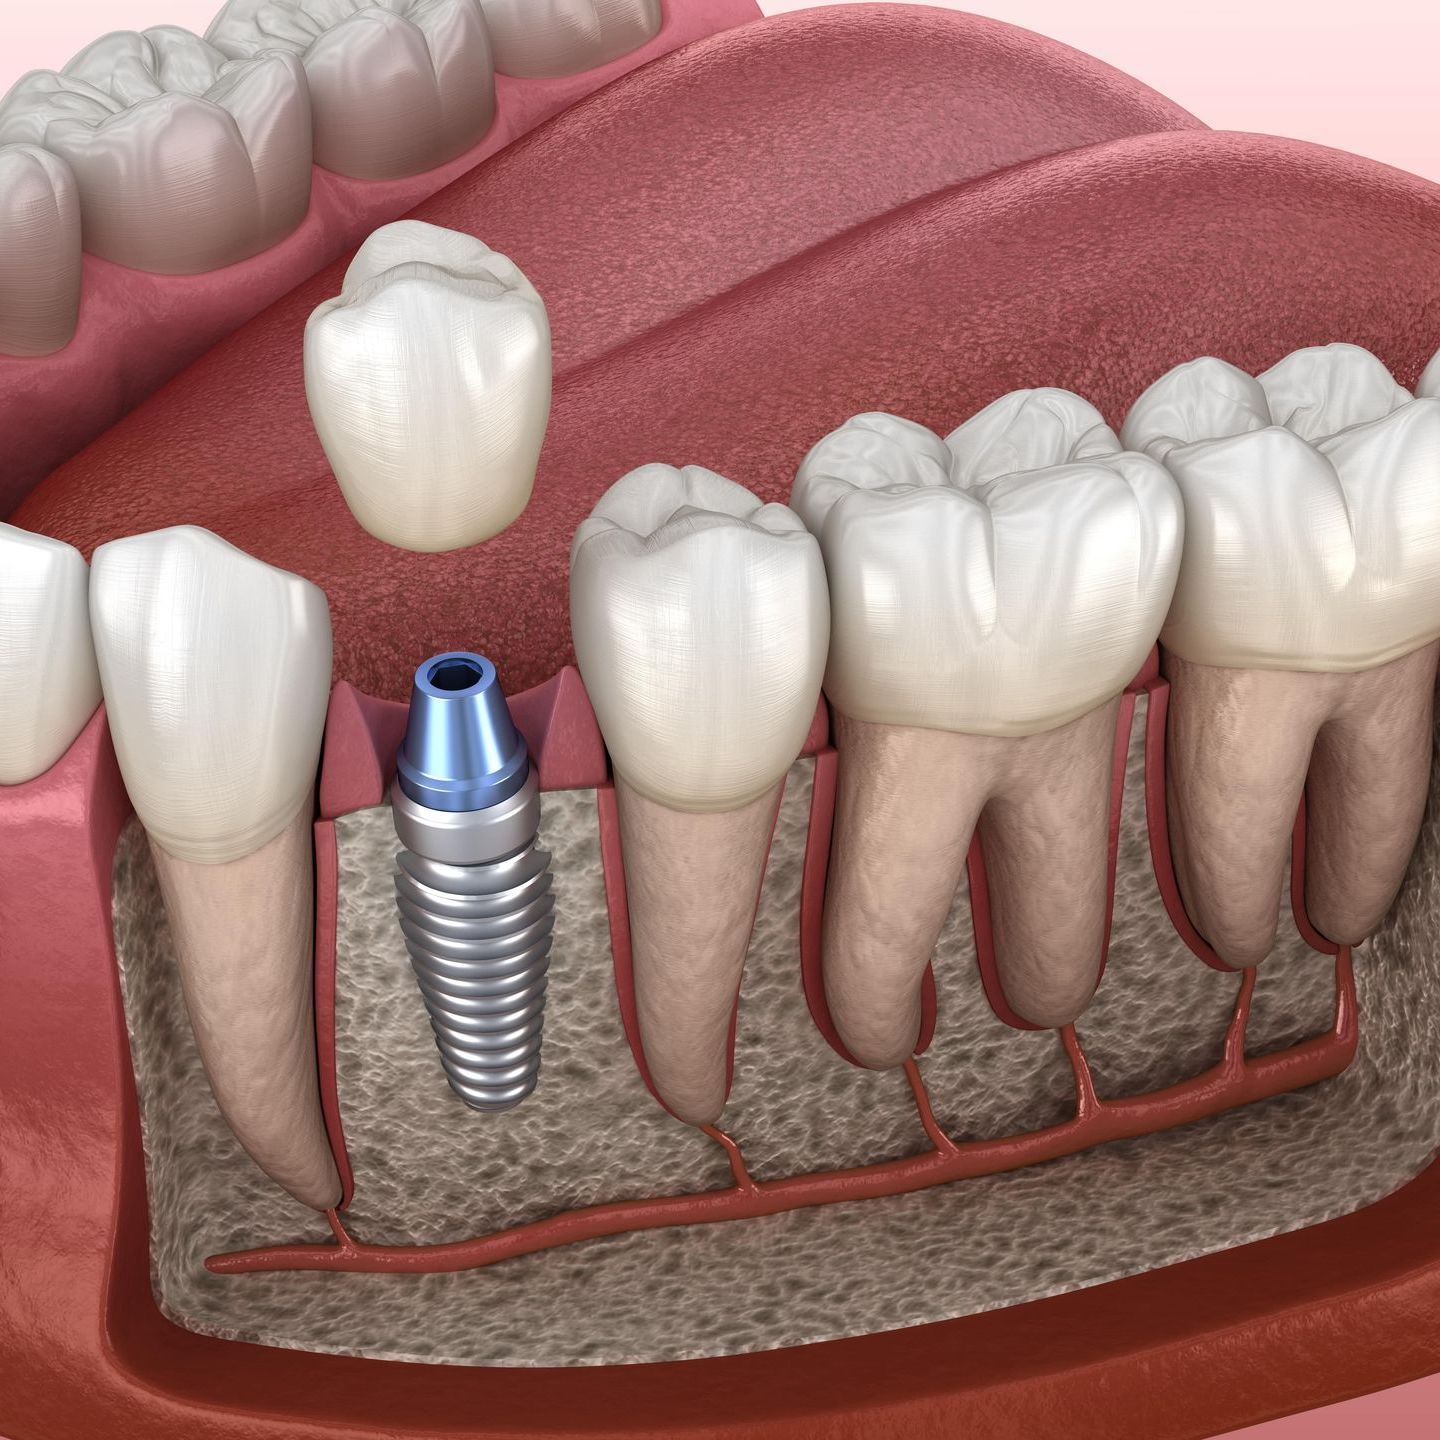 A computer generated image of the inside of the gum showing the dental implant